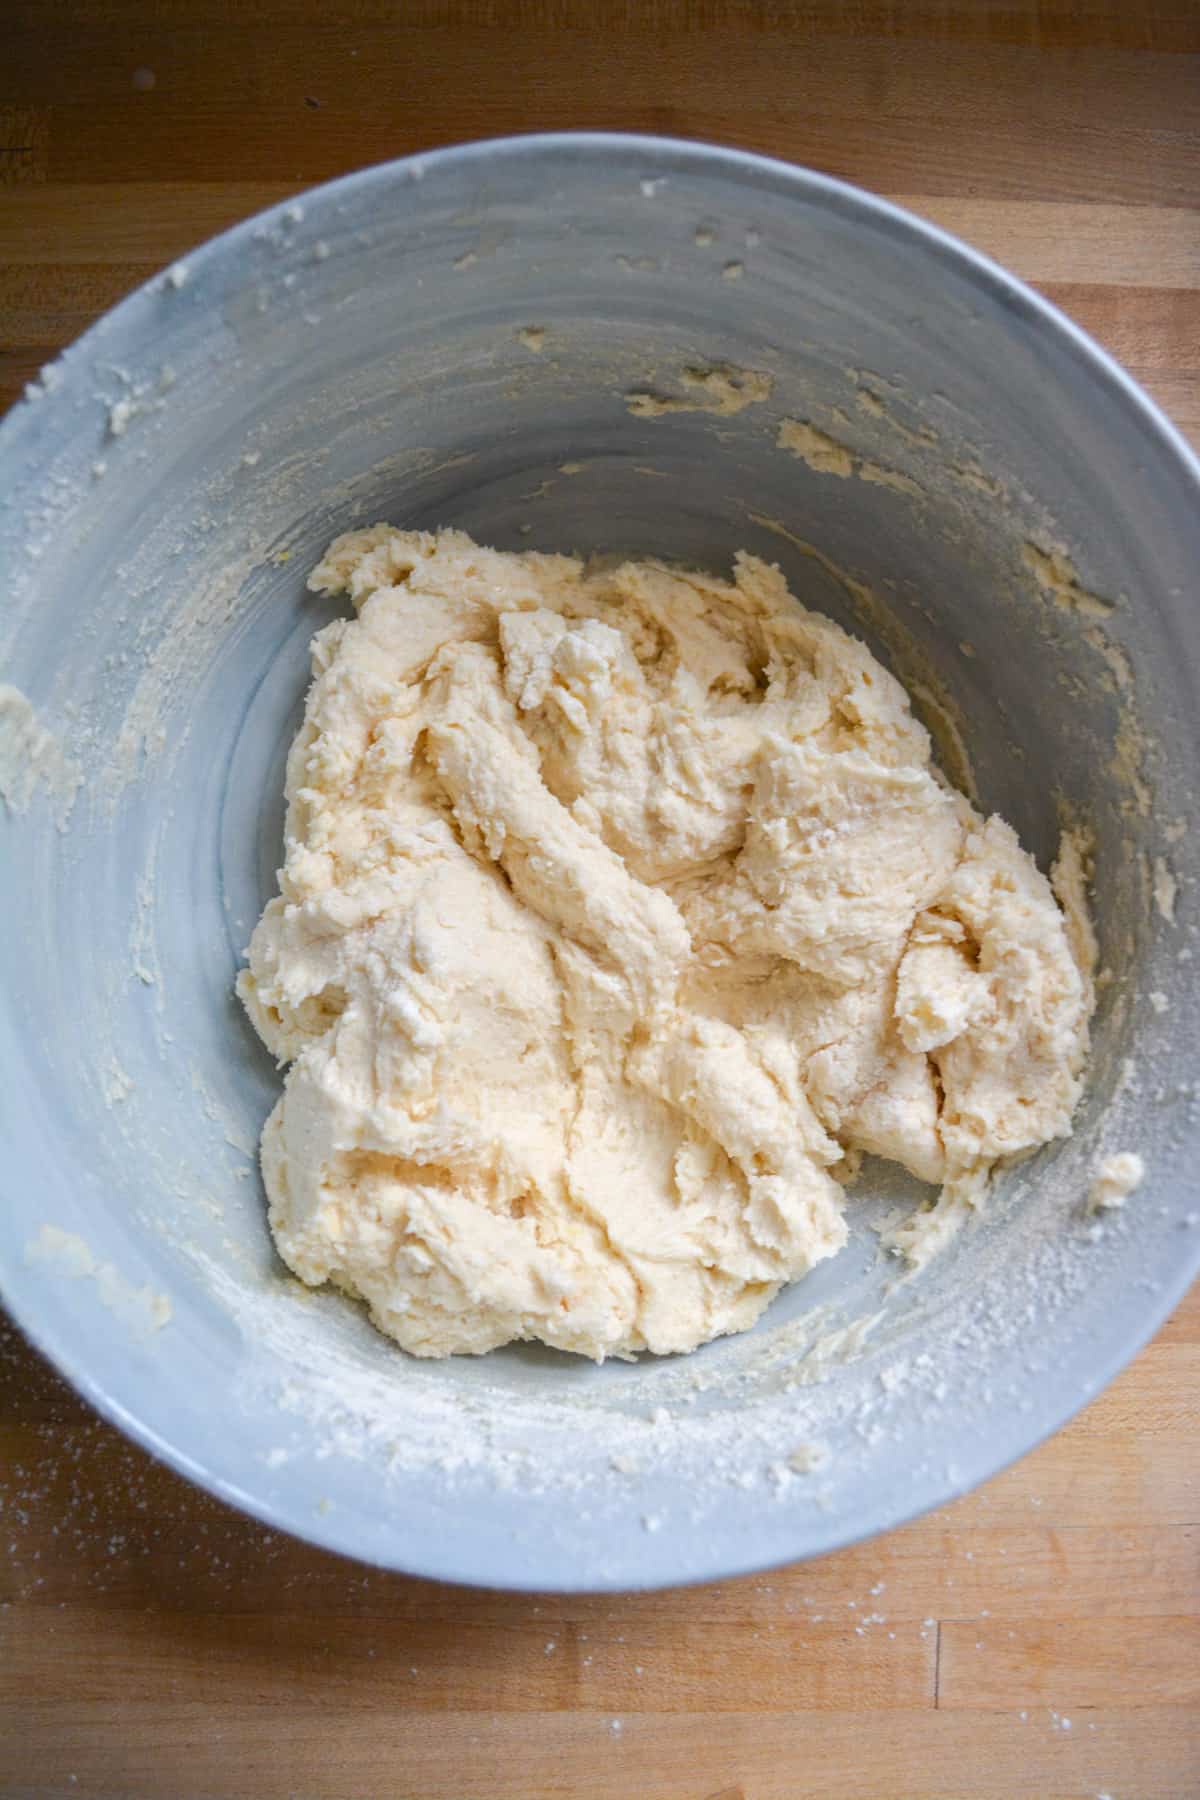 Half of the dry ingredients mixed into the cake batter mixture.